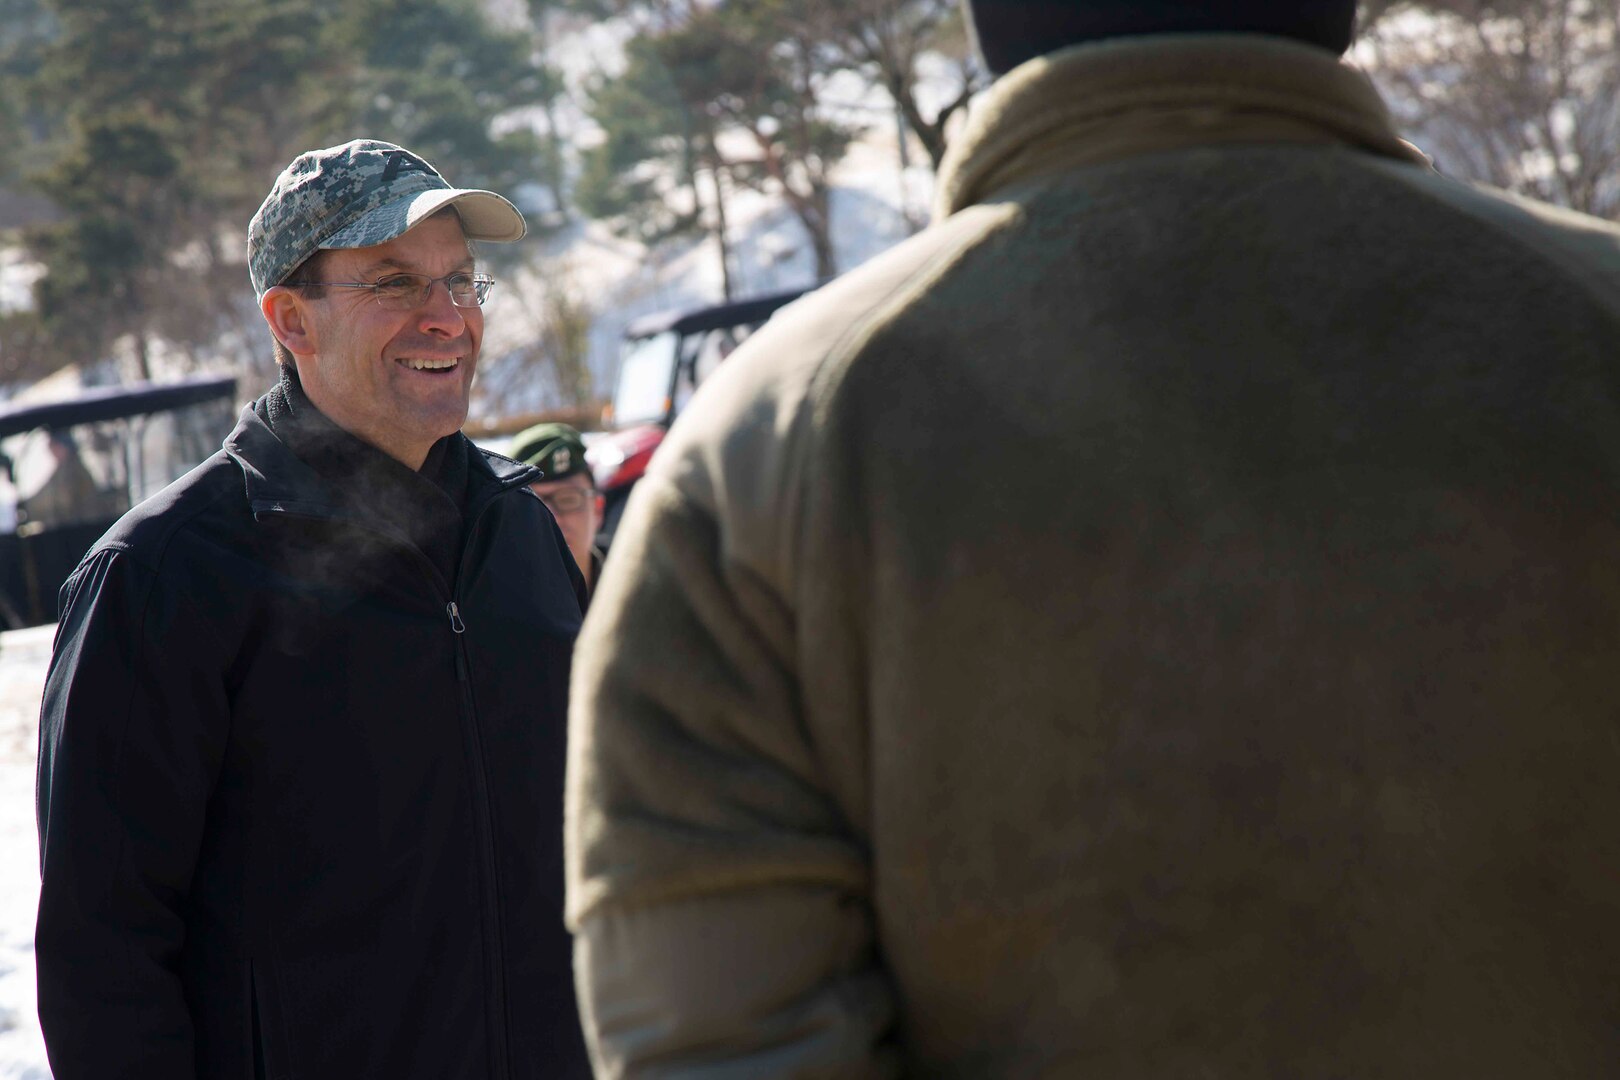 Secretary of the Army Mark T. Esper (left)  talks with Soldiers from Combined Task Force Defender, 35th Air Defense Artillery Brigade, at Seongju, South Korea on Jan. 10, 2018. Esper visited Korea to discuss readiness with units throughout the Korean theater and to inform Soldiers, Families and Civilians on his position and policies as the Secretary of The Army during his three-day visit.